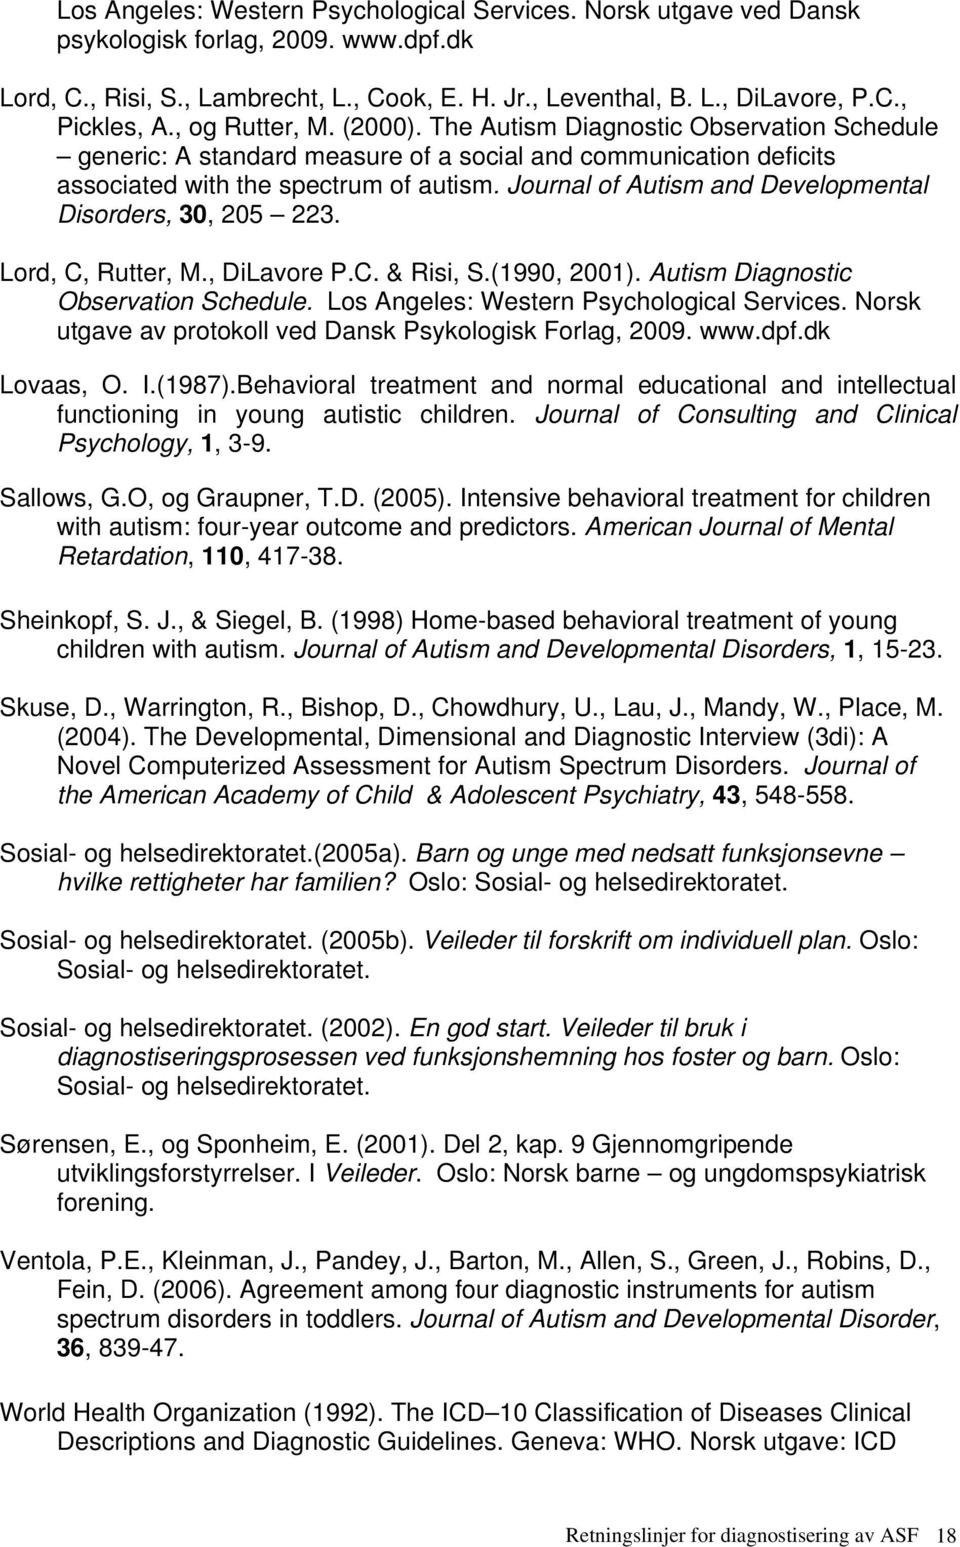 Journal of Autism and Developmental Disorders, 30, 205 223. Lord, C, Rutter, M., DiLavore P.C. & Risi, S.(1990, 2001). Autism Diagnostic Observation Schedule.